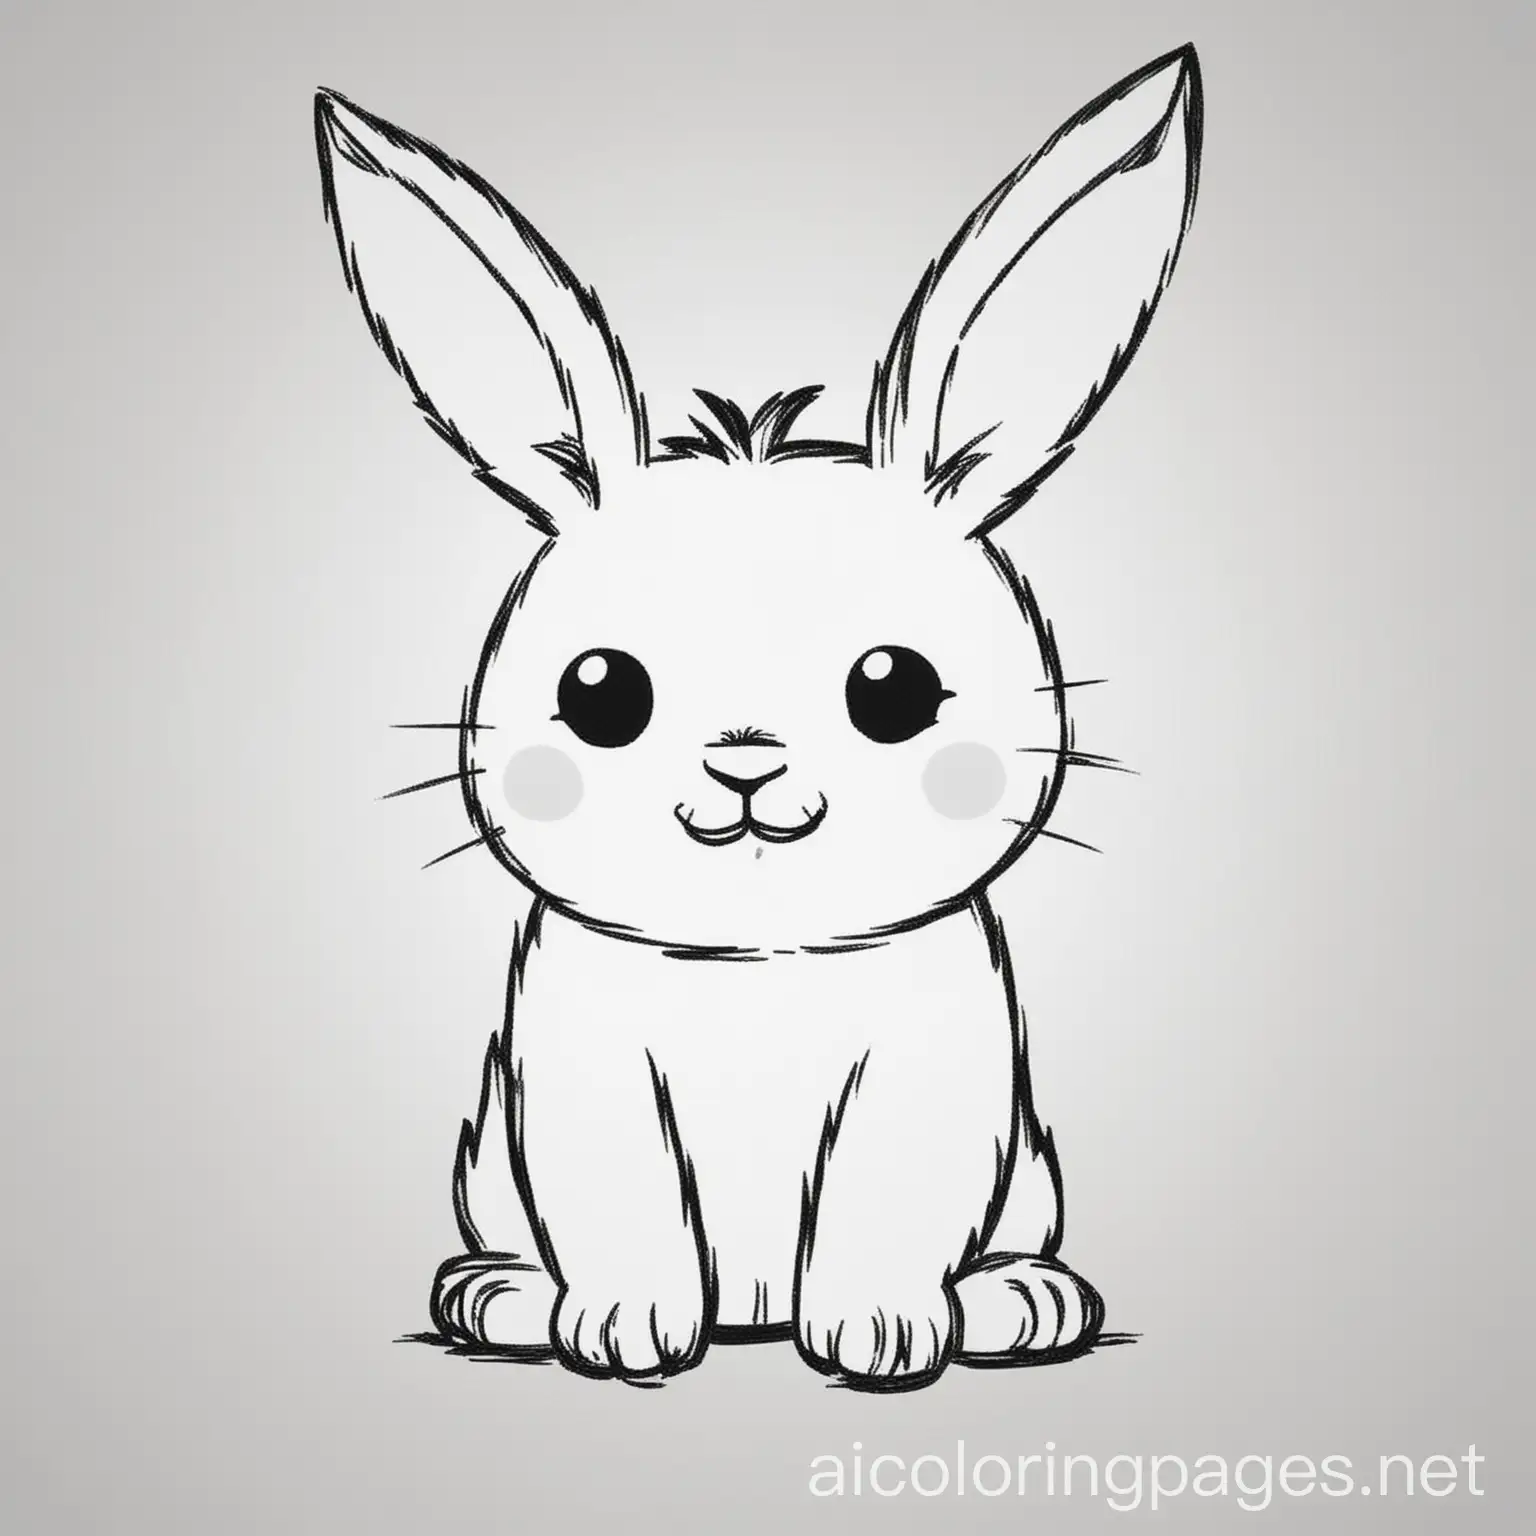 Simple-Rabbit-Coloring-Page-EasytoColor-Black-and-White-Line-Art-for-Kids